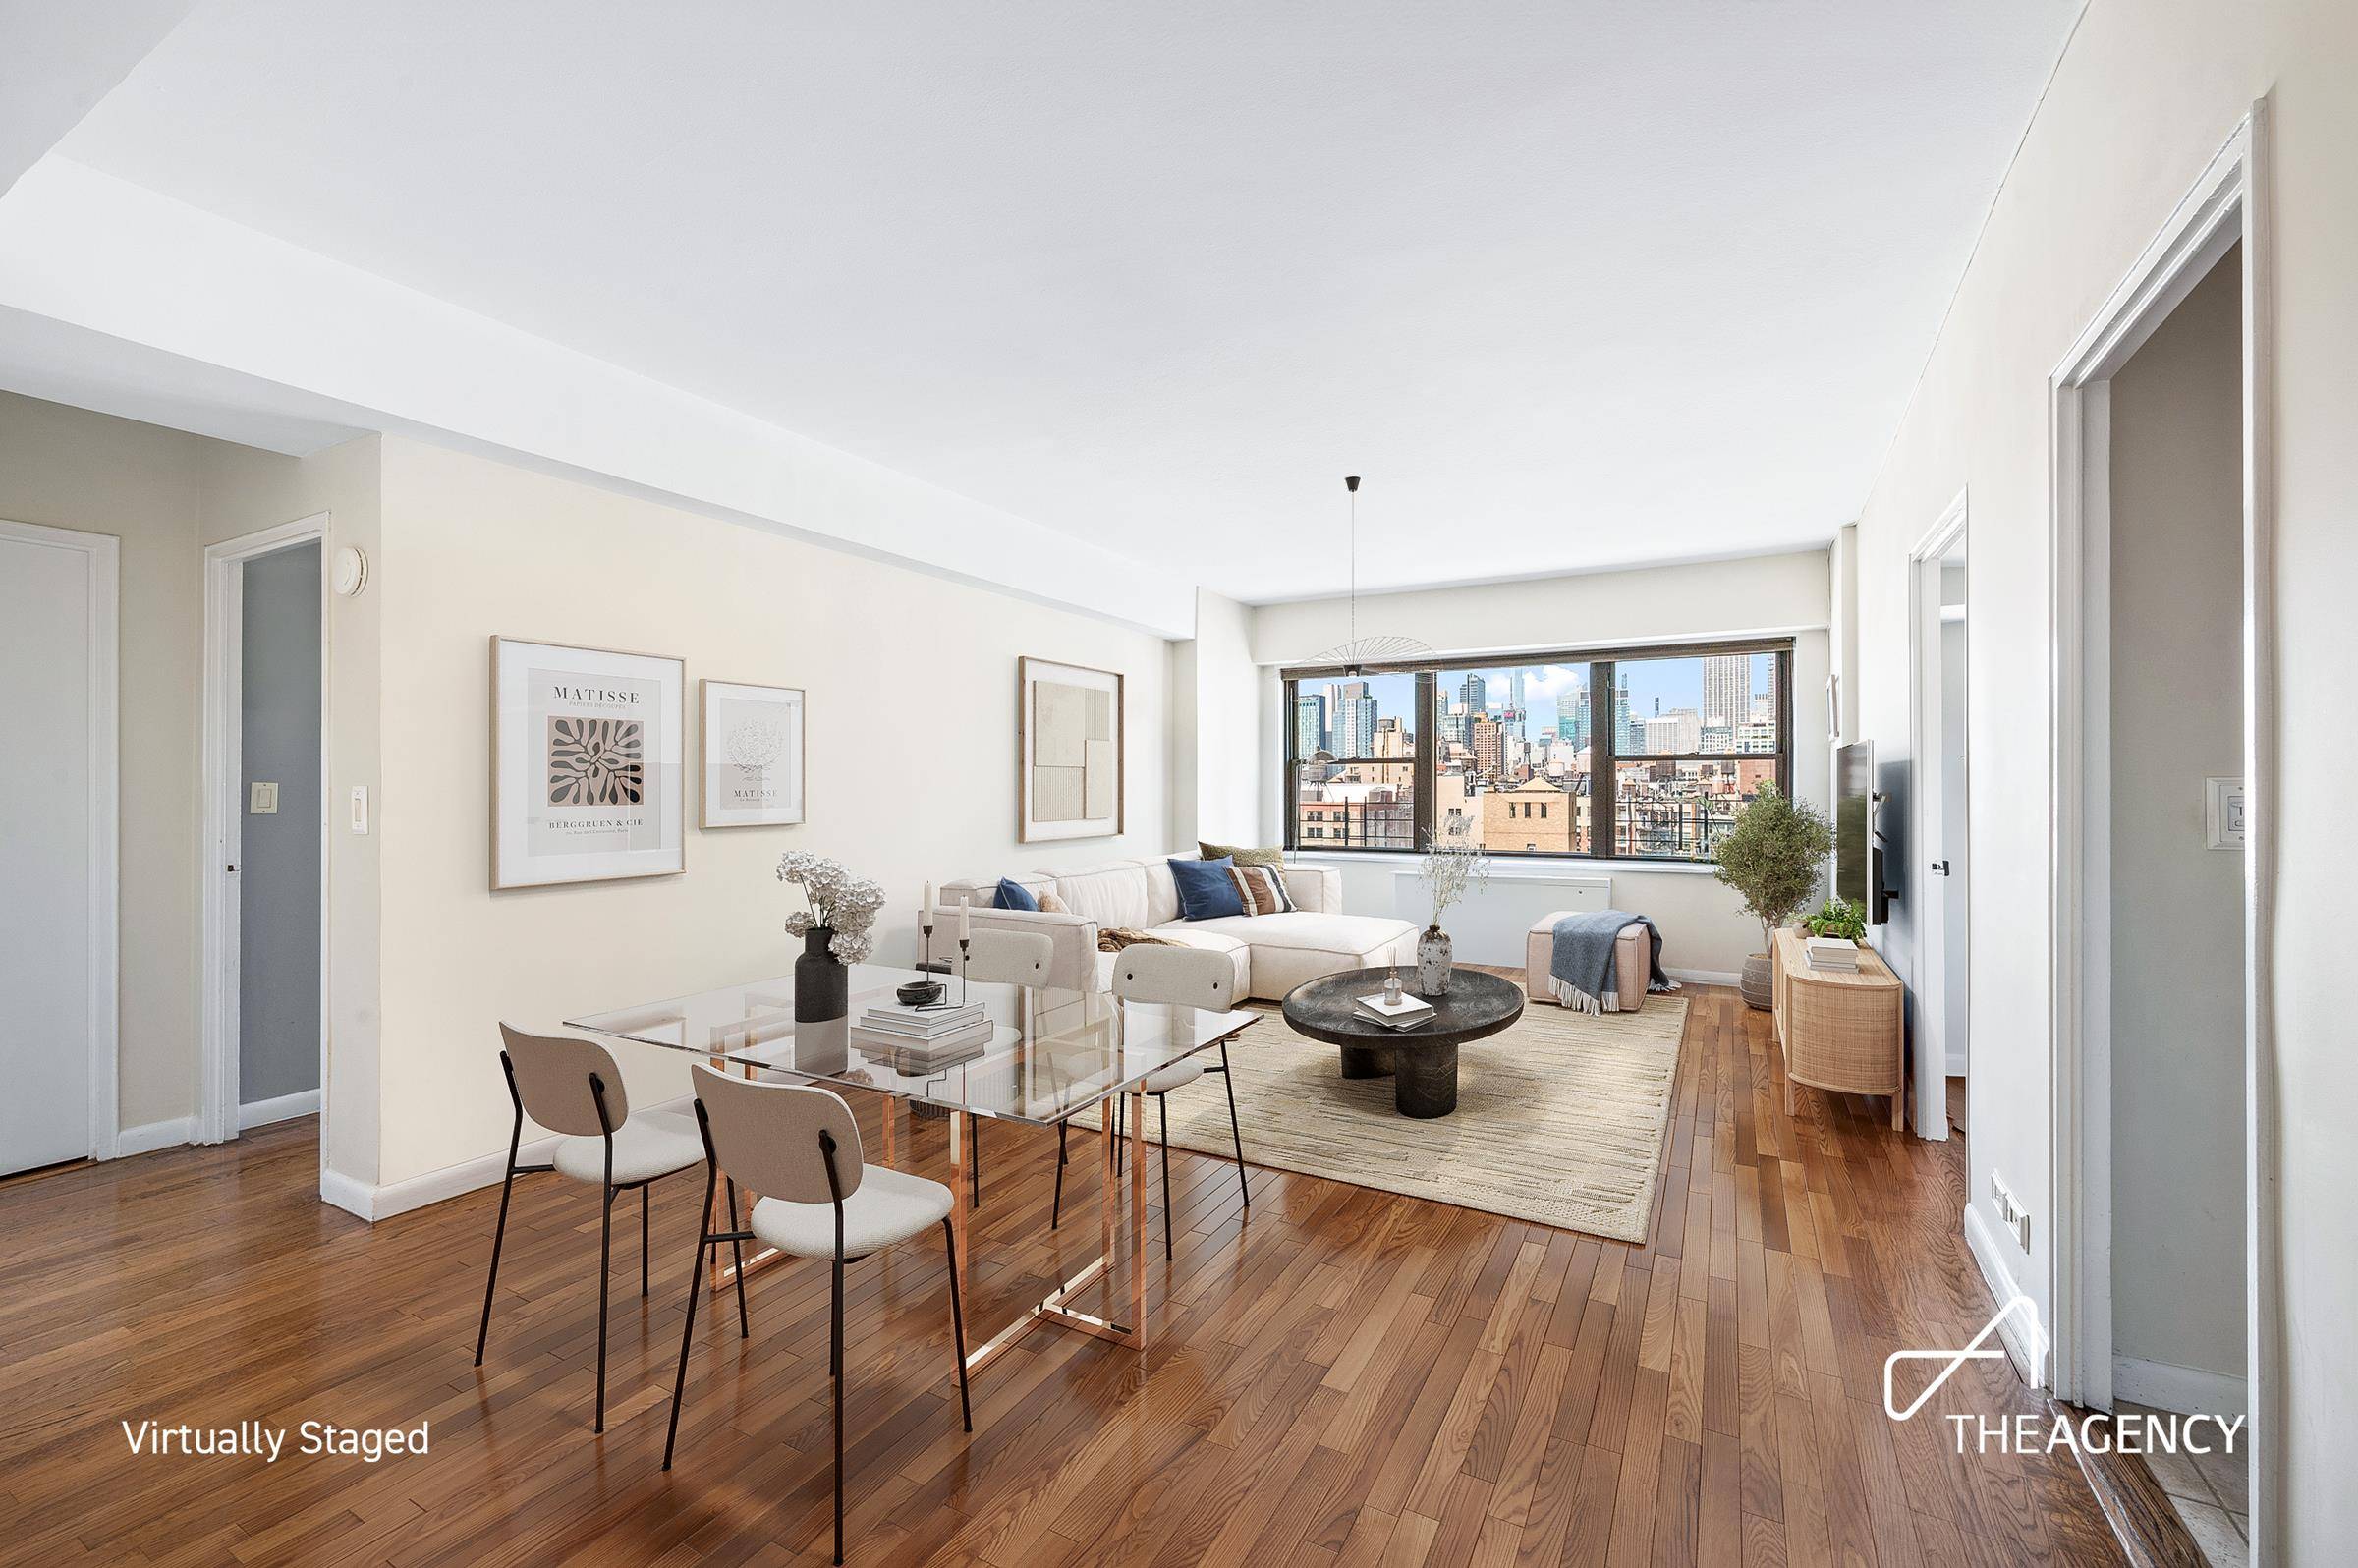 Welcome to this rarely available high floor 2 bedroom residence, offering stunning views of the Manhattan skyline.